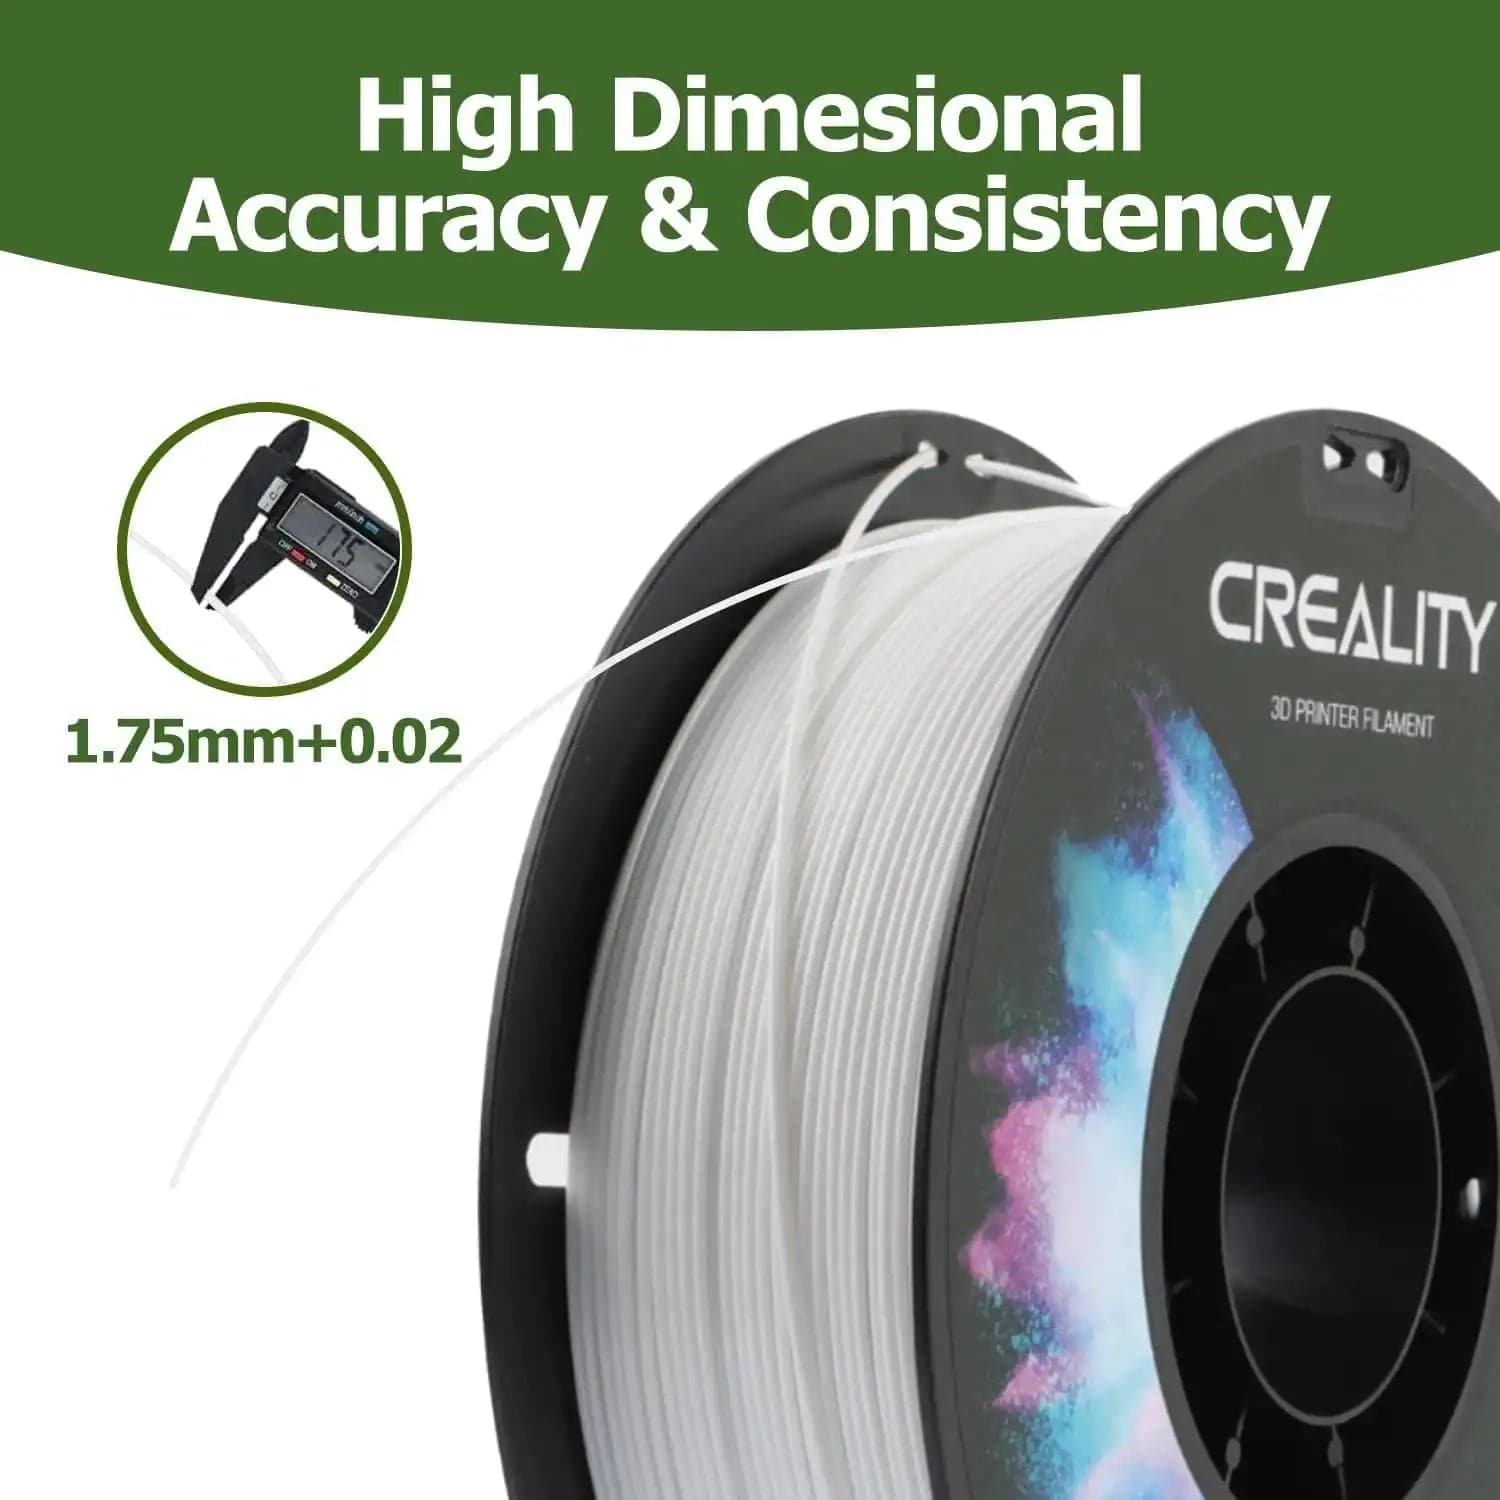 Official Creality PETG 3D Printer Filament 1.75mm 1KG (2.2lbs)Features:

【Ship From Amazon FBA Warehouse】Same shipping service with Amazon. Enjoy reliable performance and fast shipping with the Amazon FBA Warehouse.
【Creality QOfficial Creality PETG 3D Printer Filament 13D Printing Materials